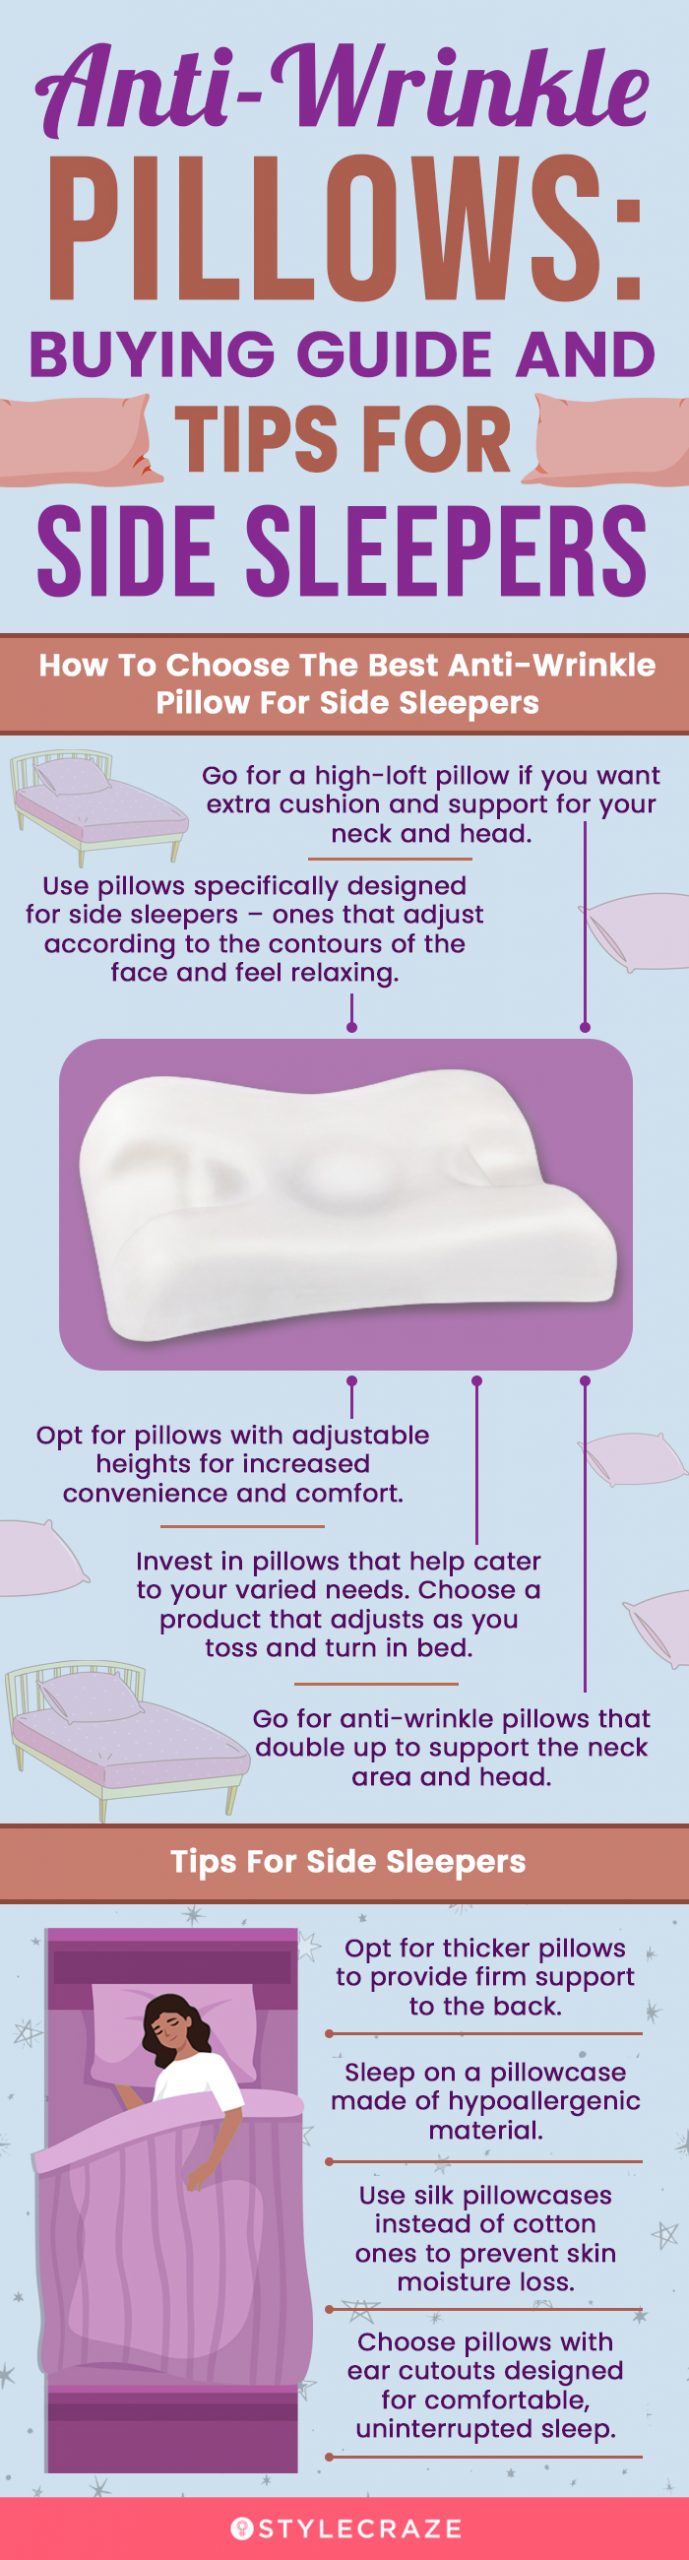 Anti-Wrinkle Pillows: Buying Guide & Tips For Side Sleepers (infographic)